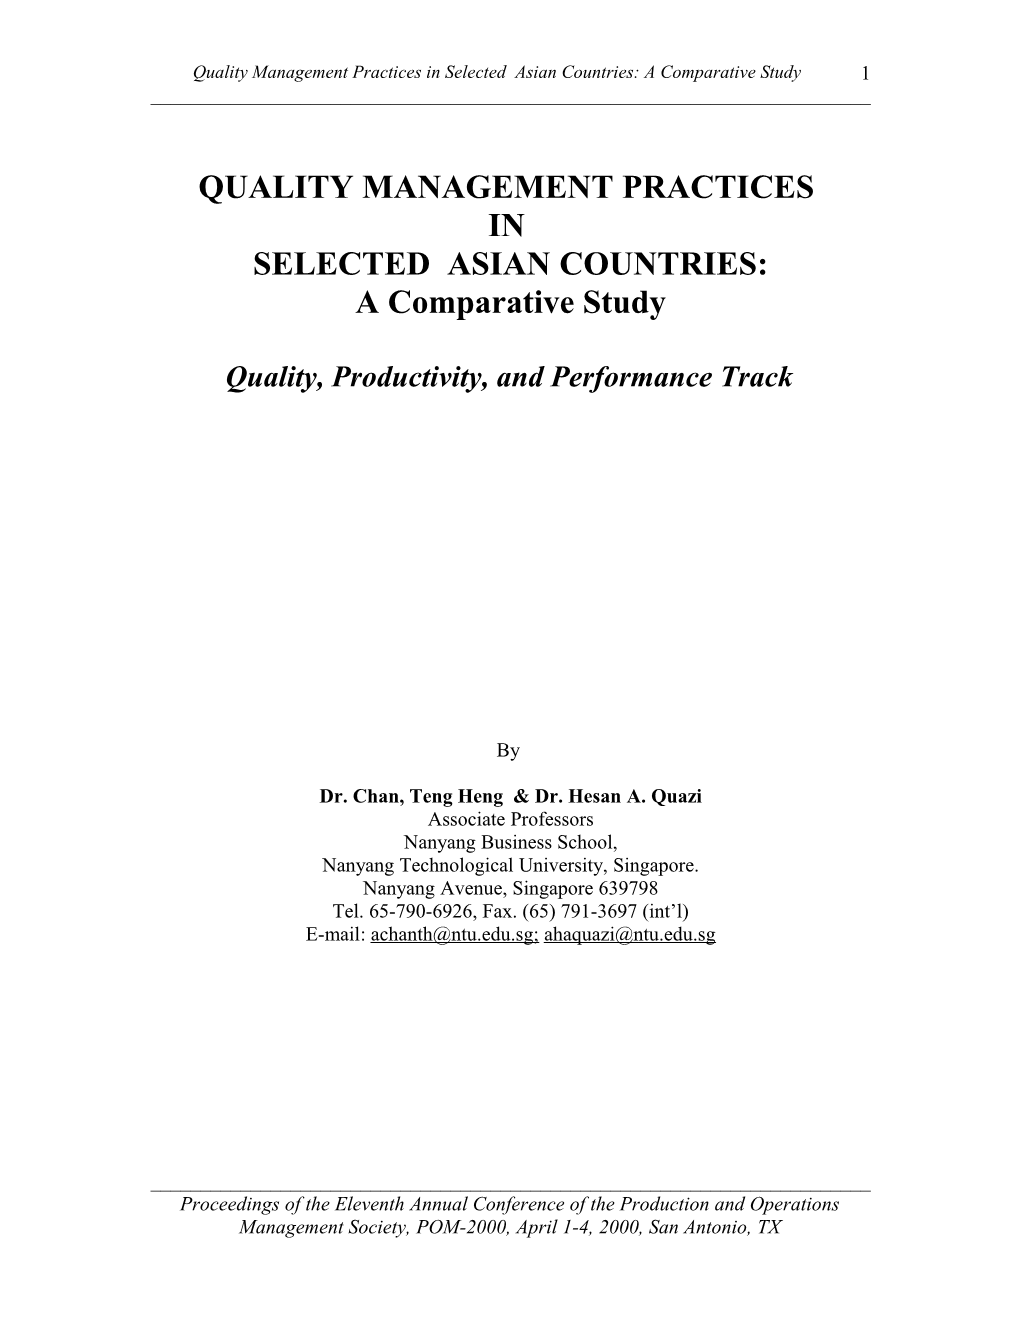 Comparative Study of Quality Management Practices in Asean Countries